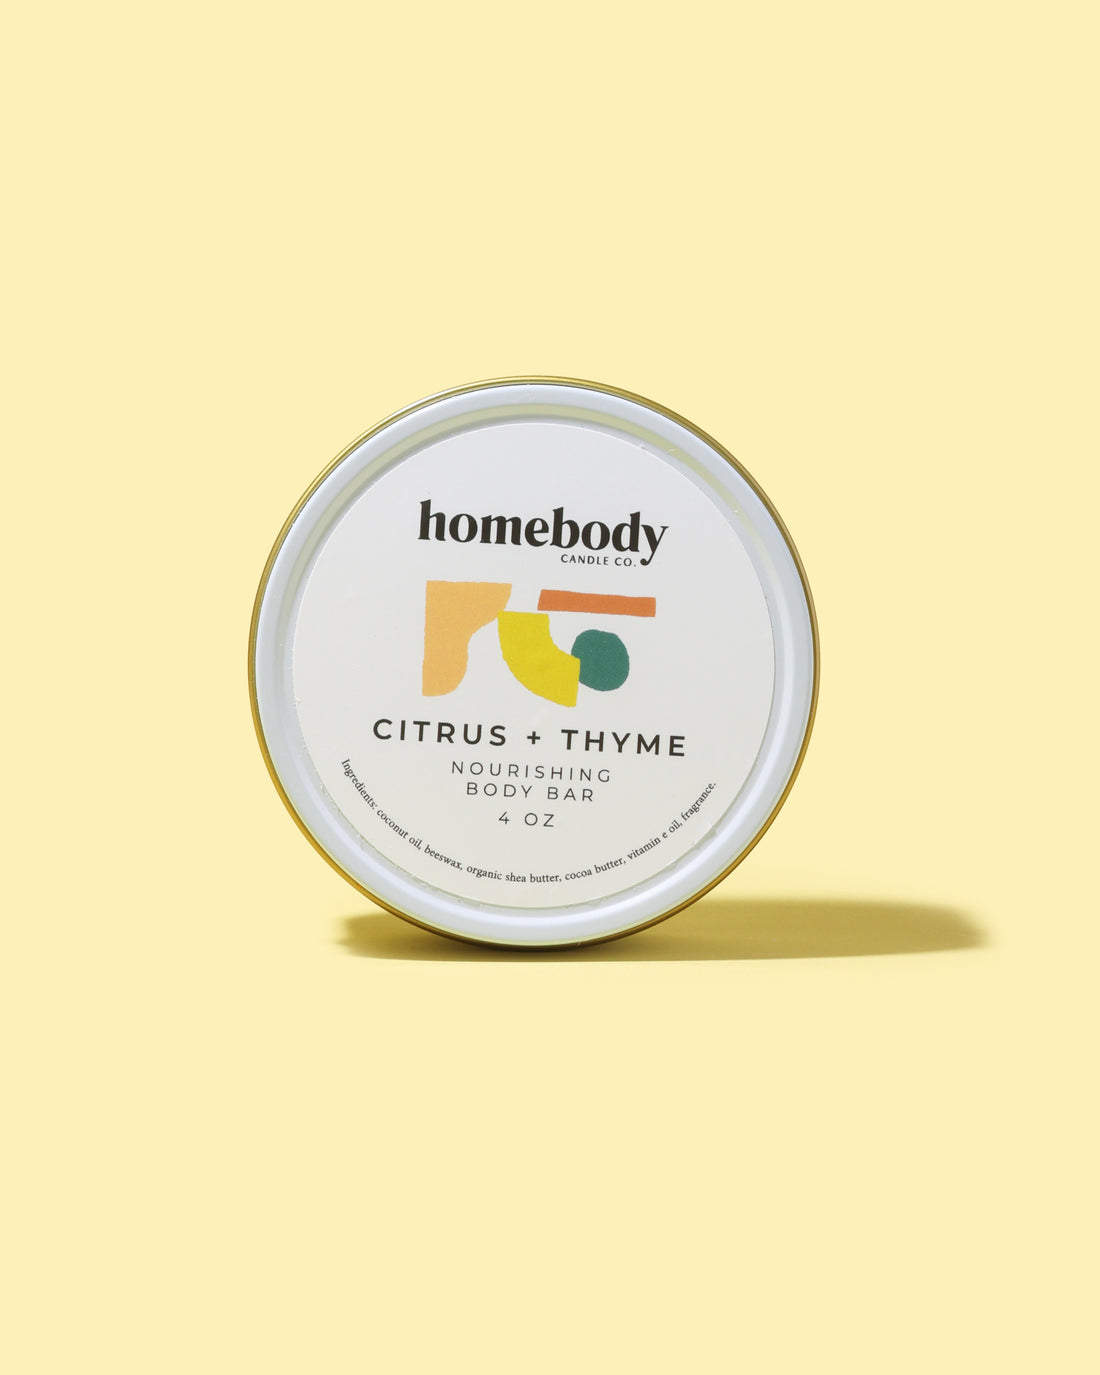 Citrus + Thyme body bar Homebody Candle Co